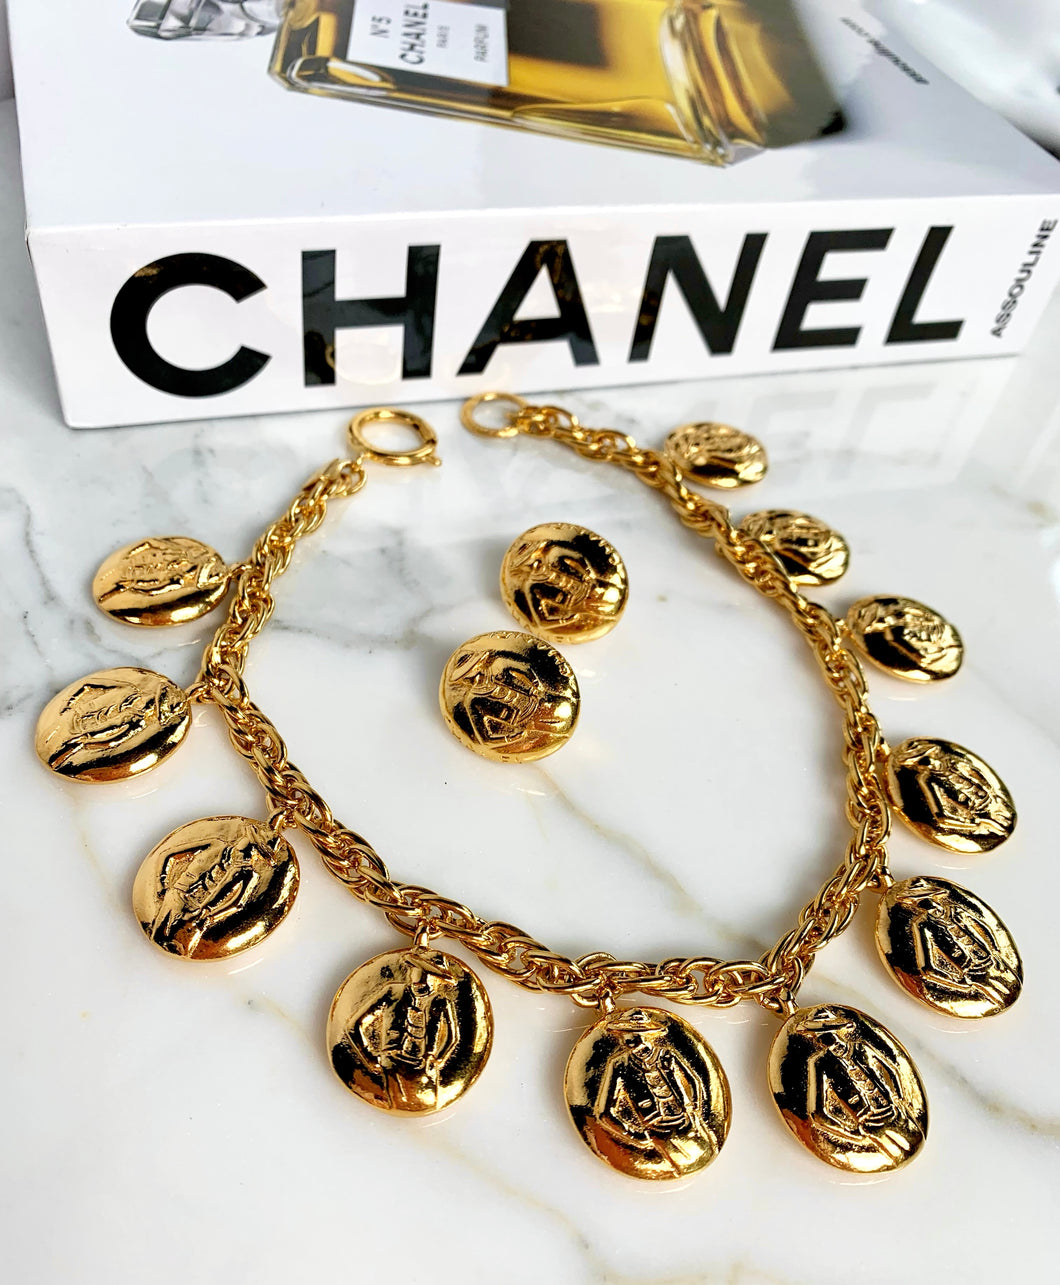 CHANEL MADEMOISELLE CHOKER REVERSIBLE NECKLACE AND EARRINGS SET